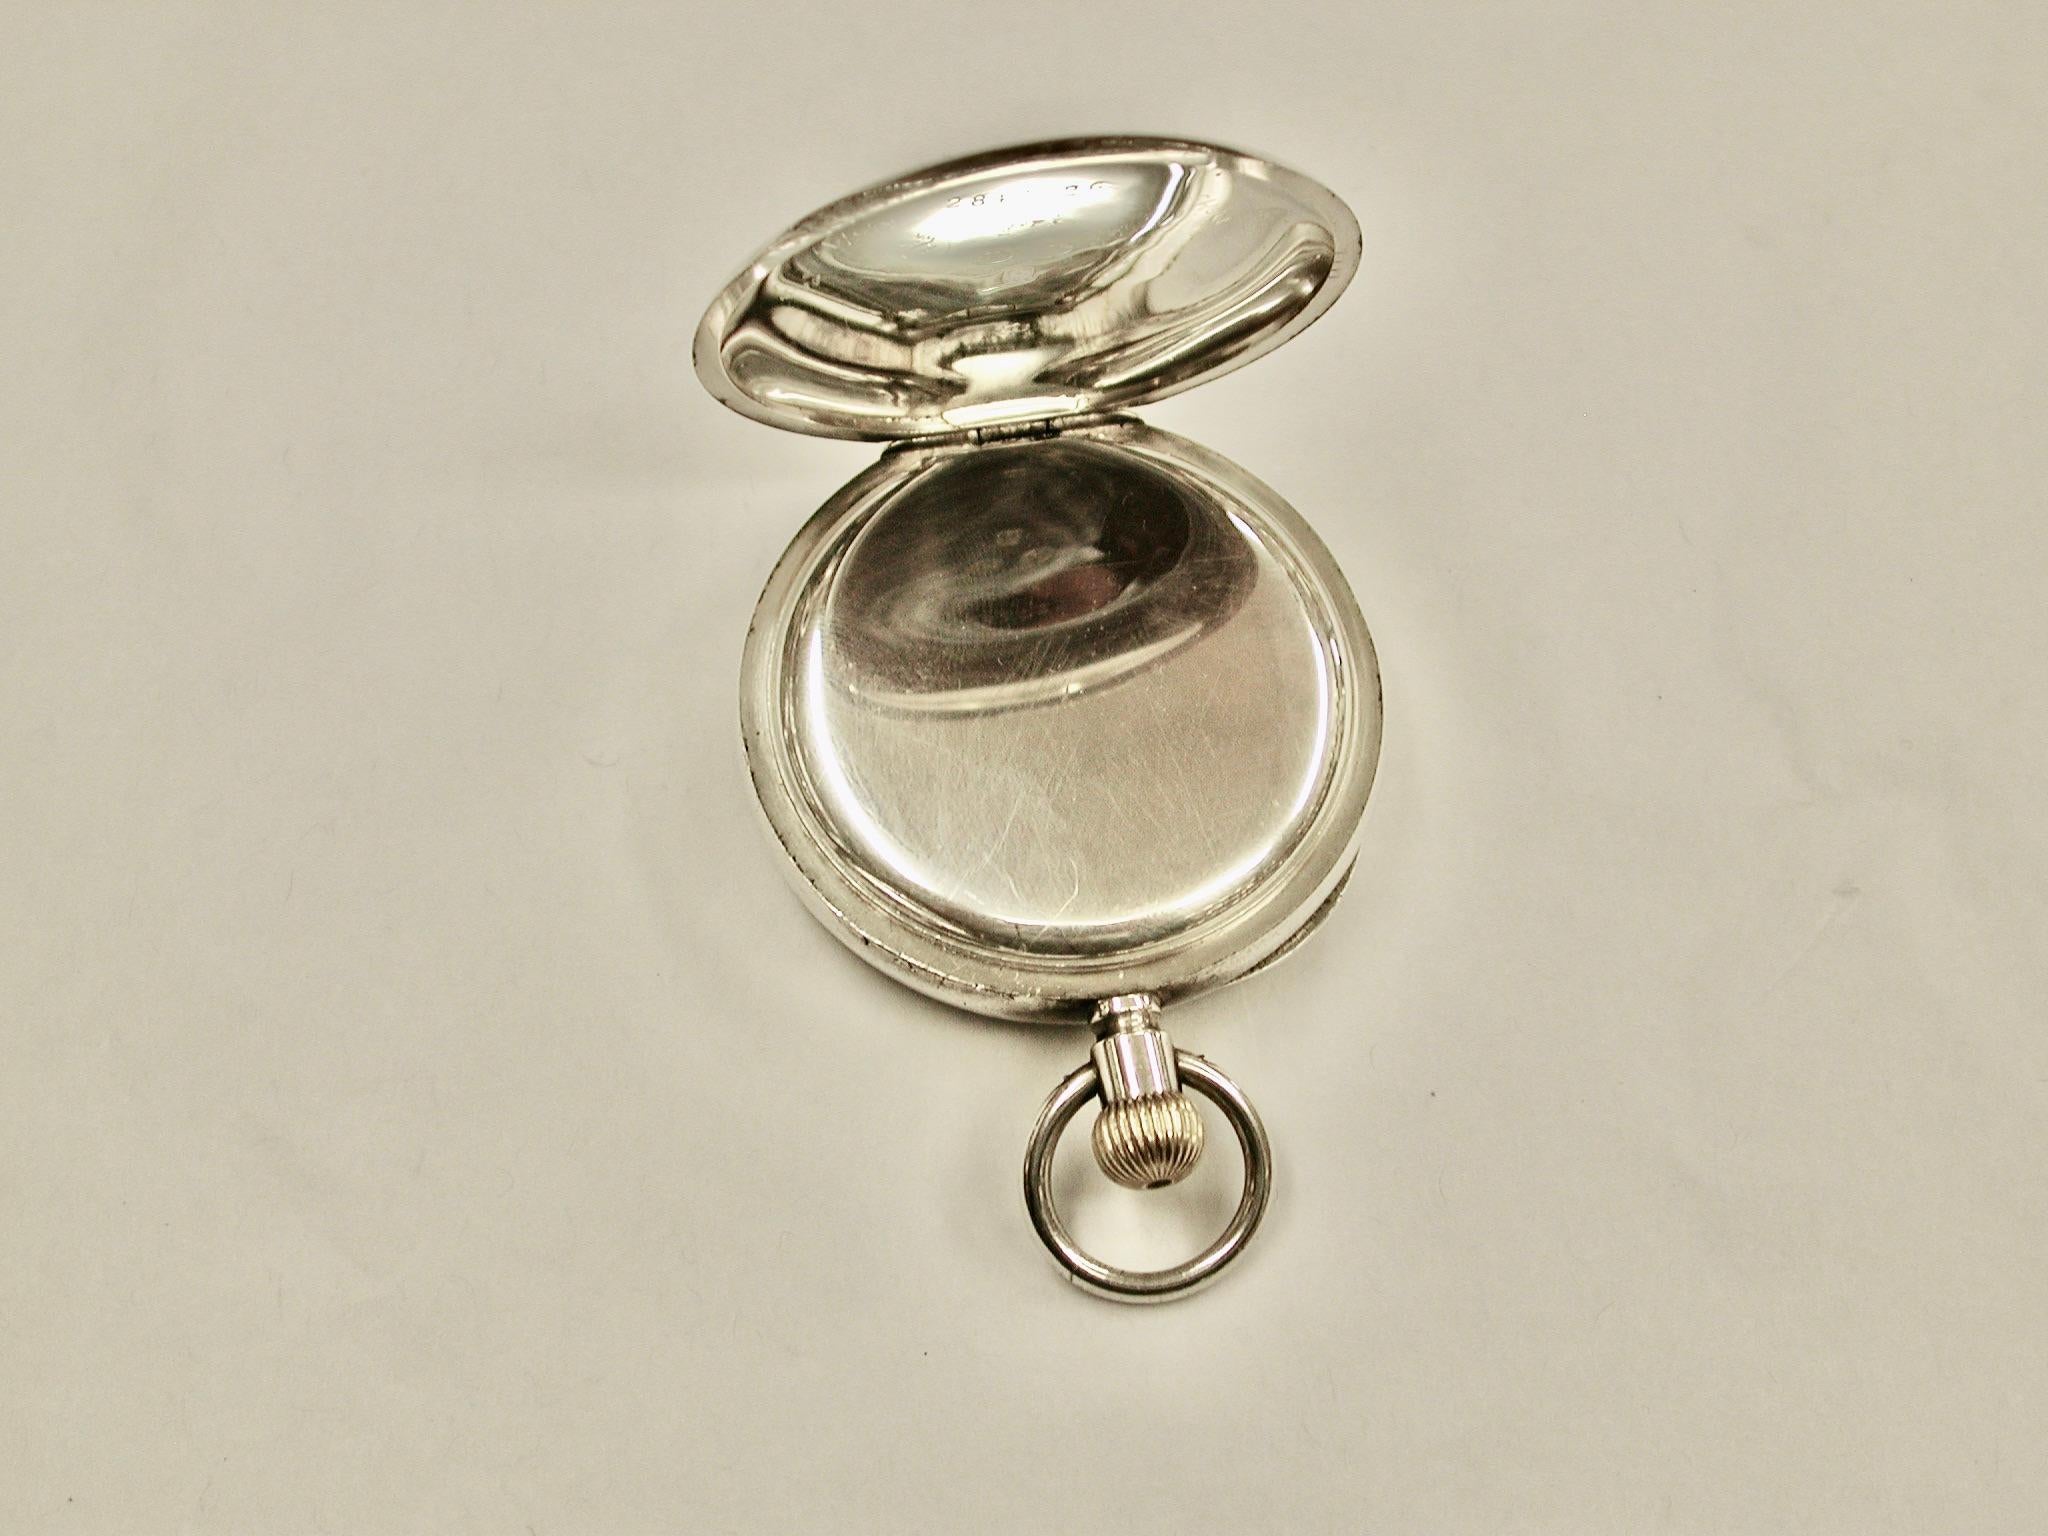 Early 20th Century Antique Silver Pocket Watch Dated 1913 London Parkinson & Frodsham For Sale